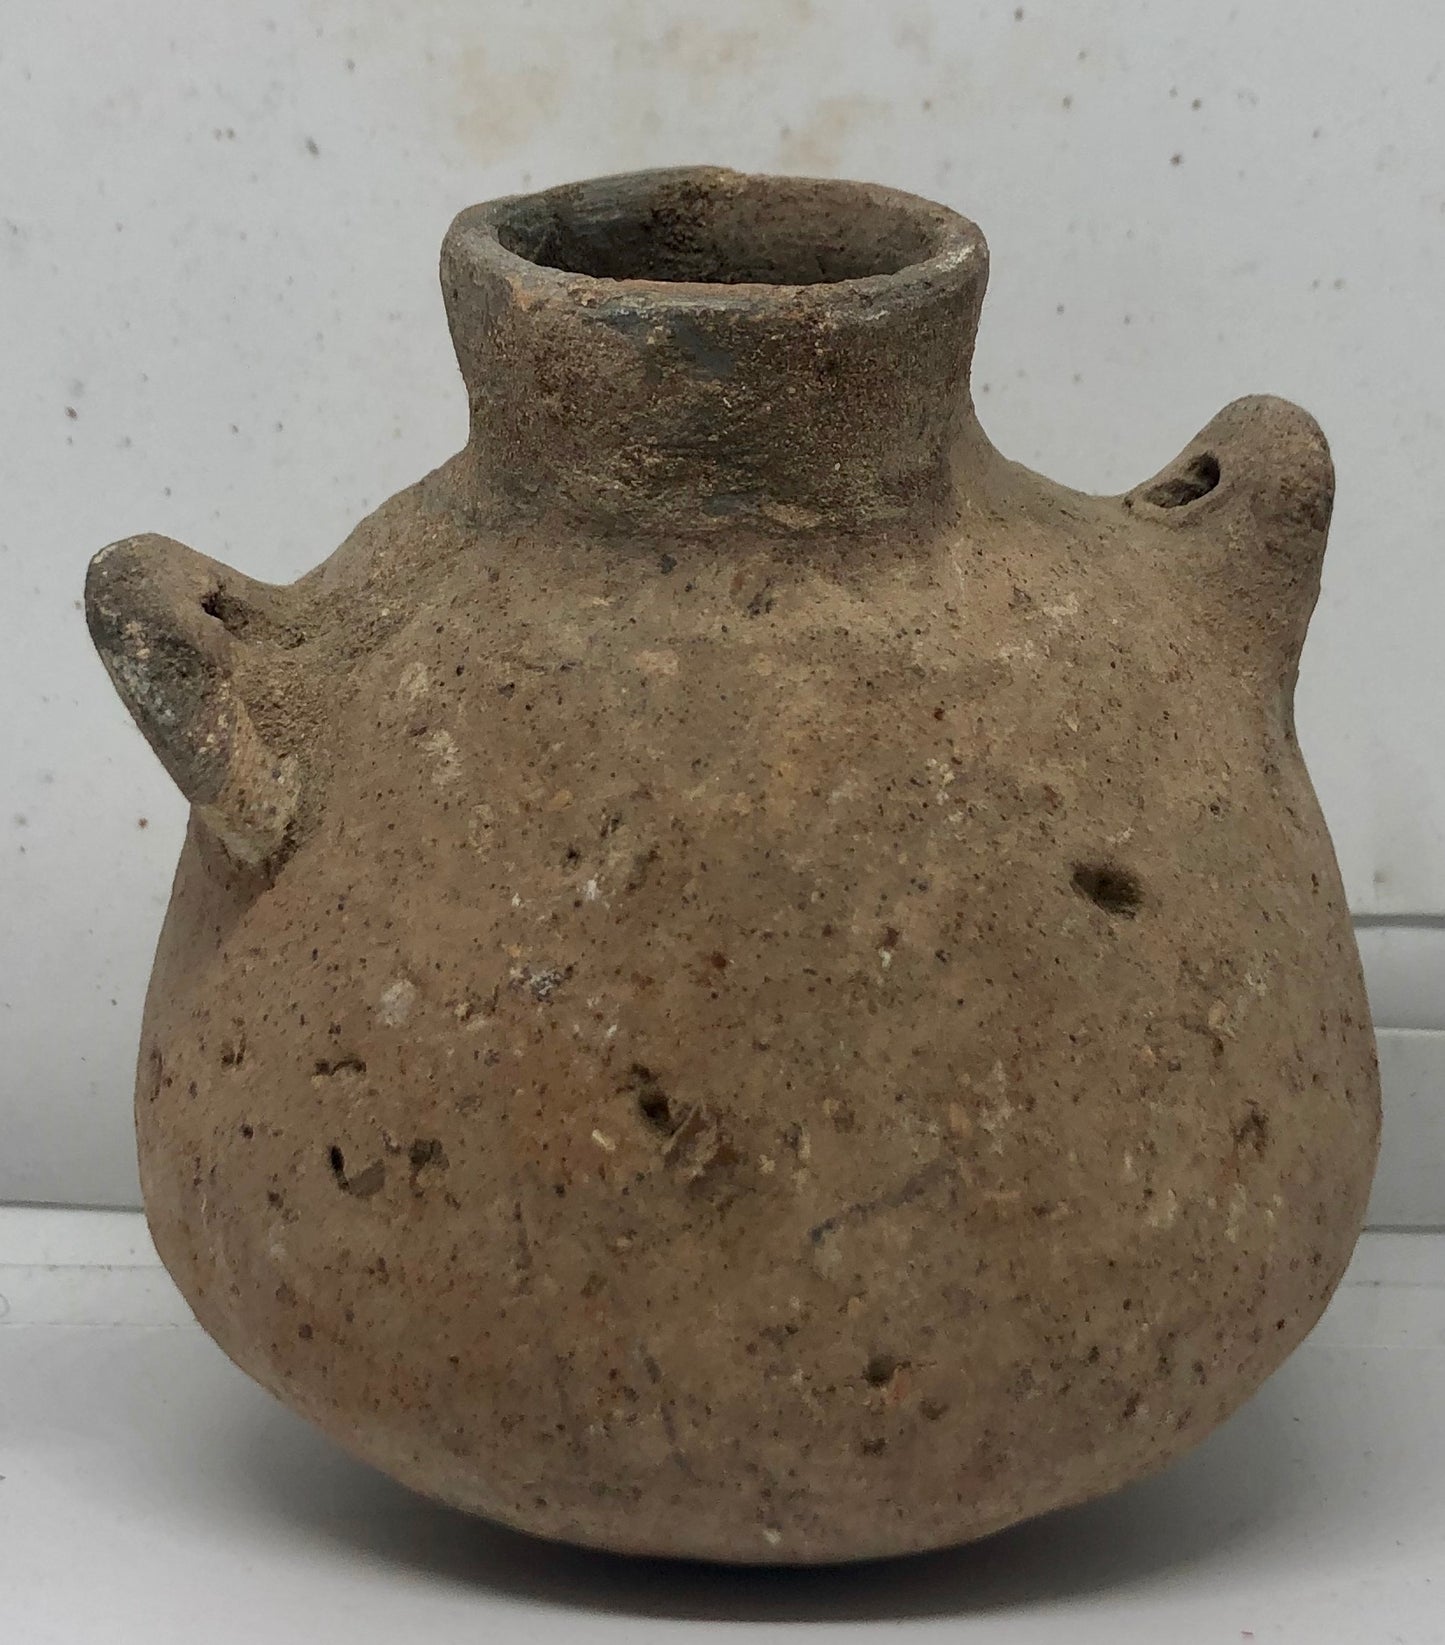 A Chalcolithic Cooking Pot, Ancient Pottery. 4000 BC.